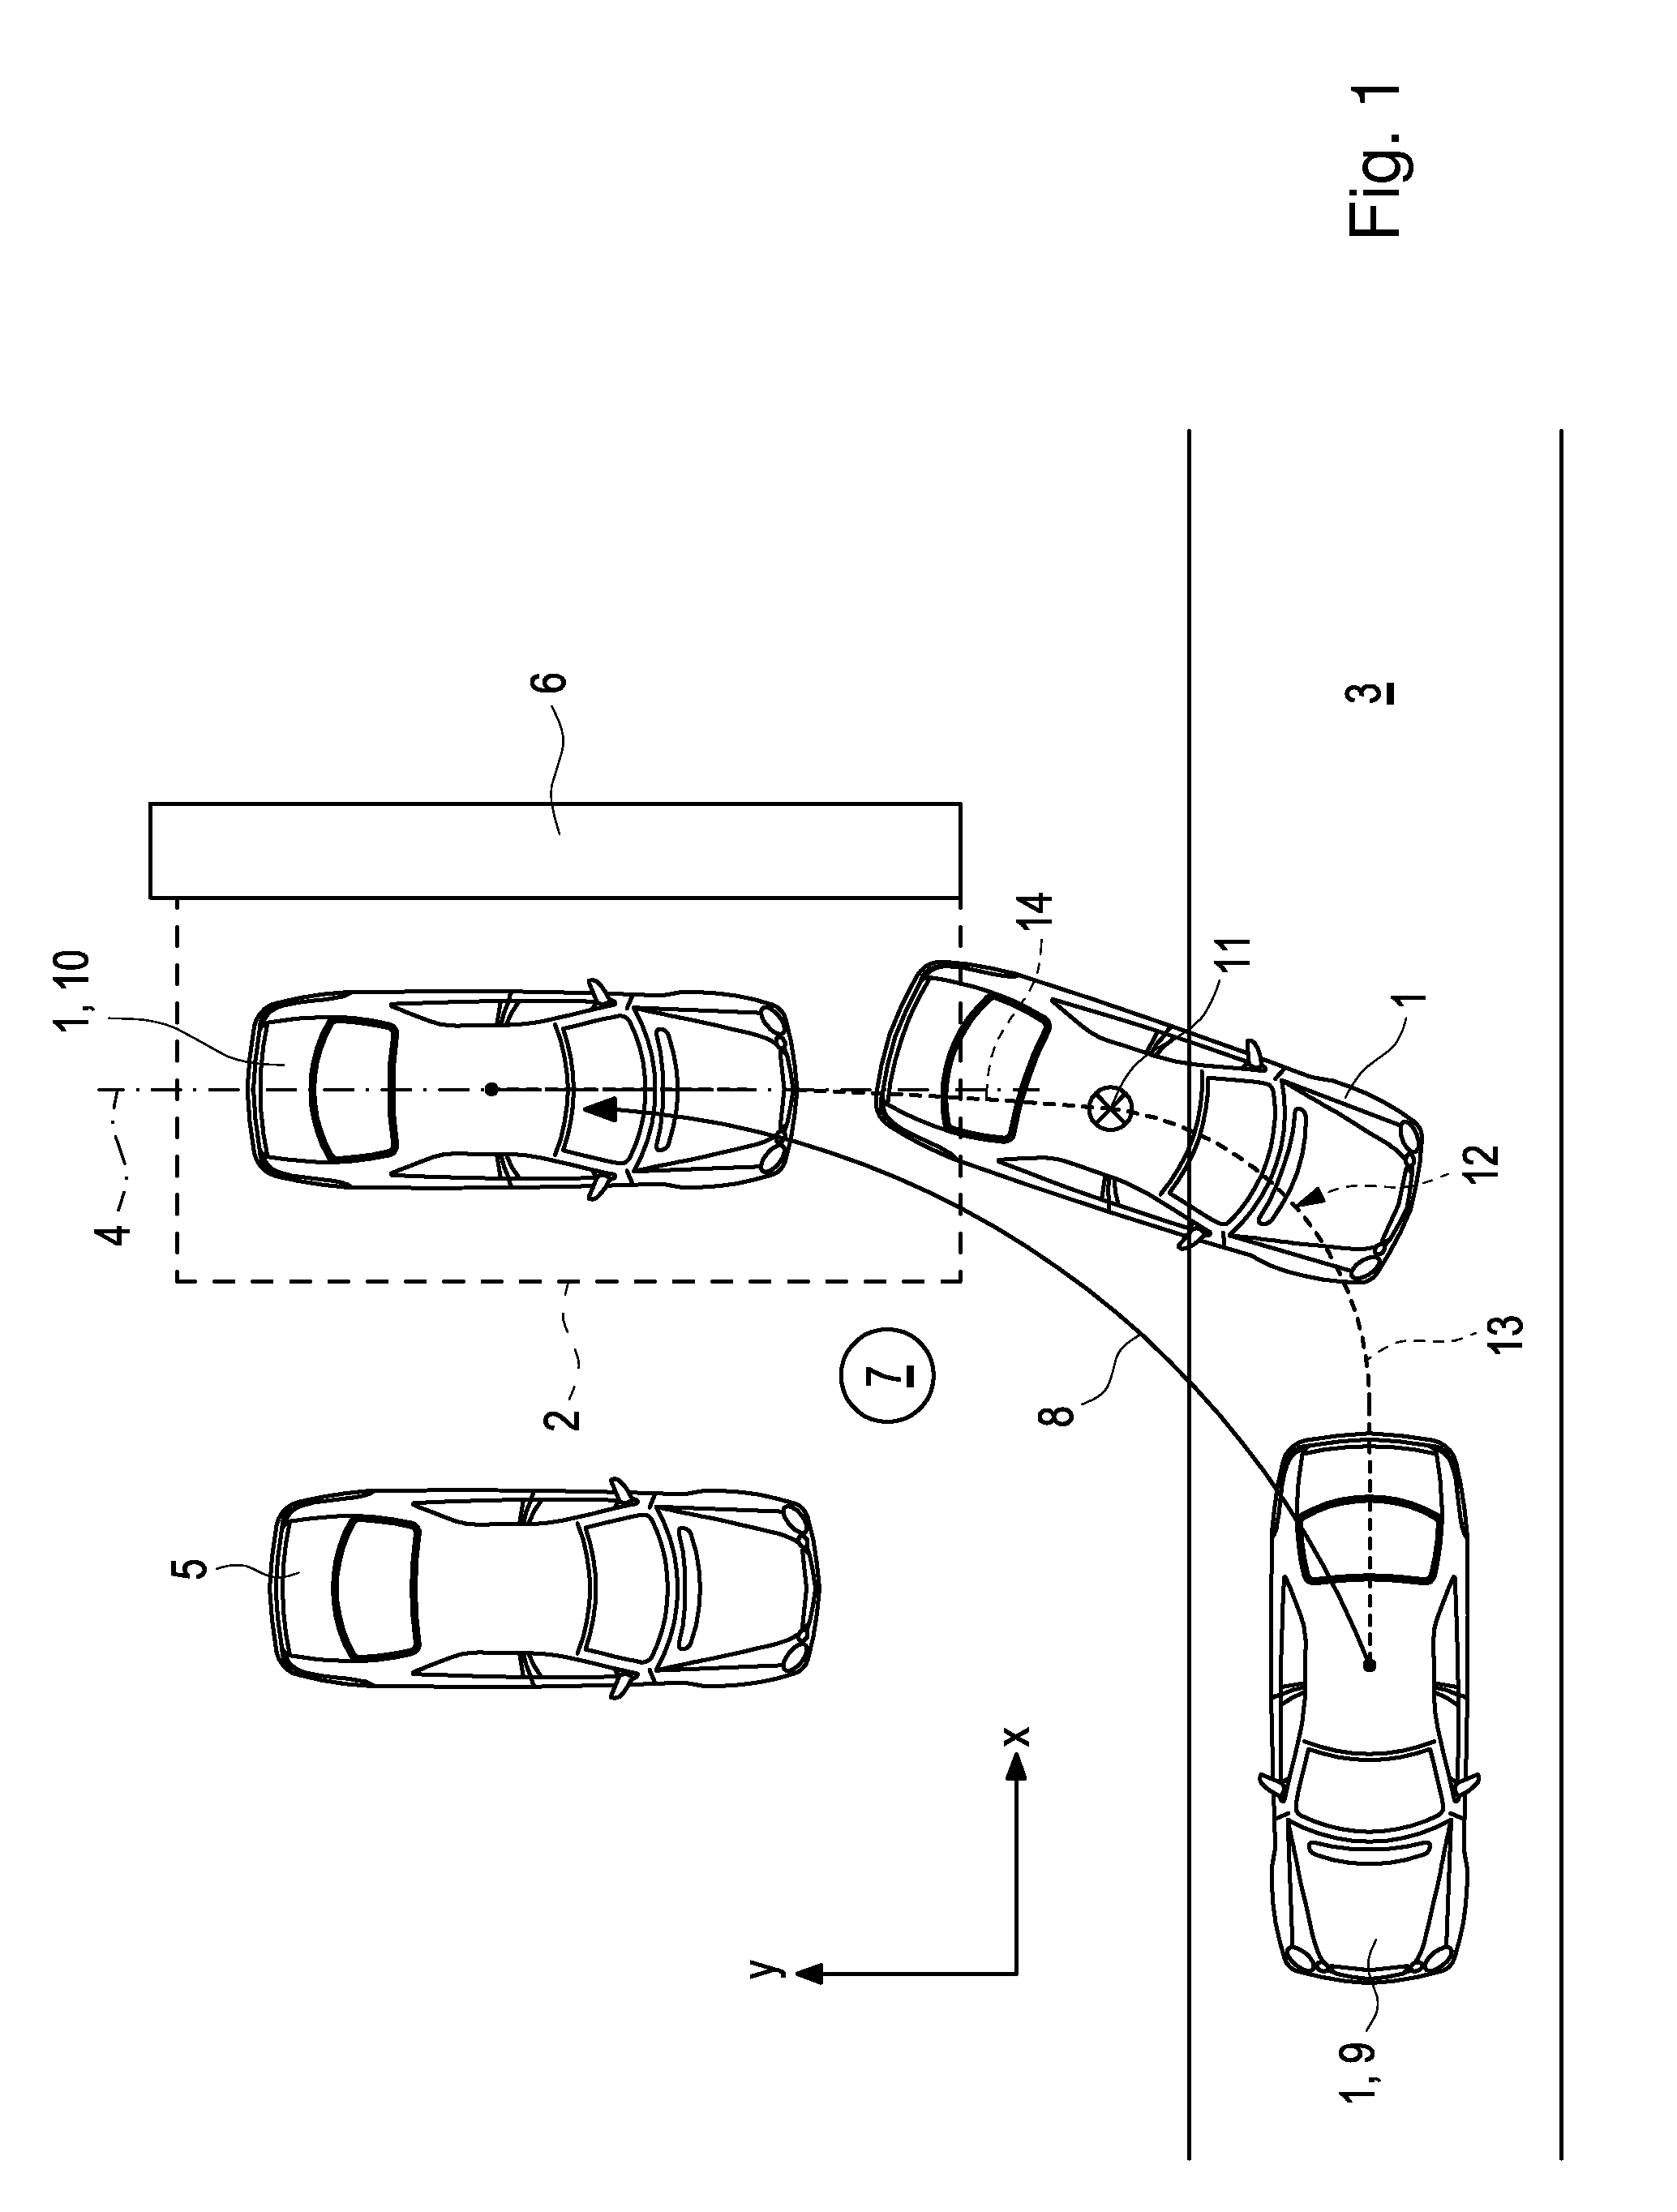 Method for Carrying Out a Process of Parking a Vehicle by Means of a Driver Assistance System